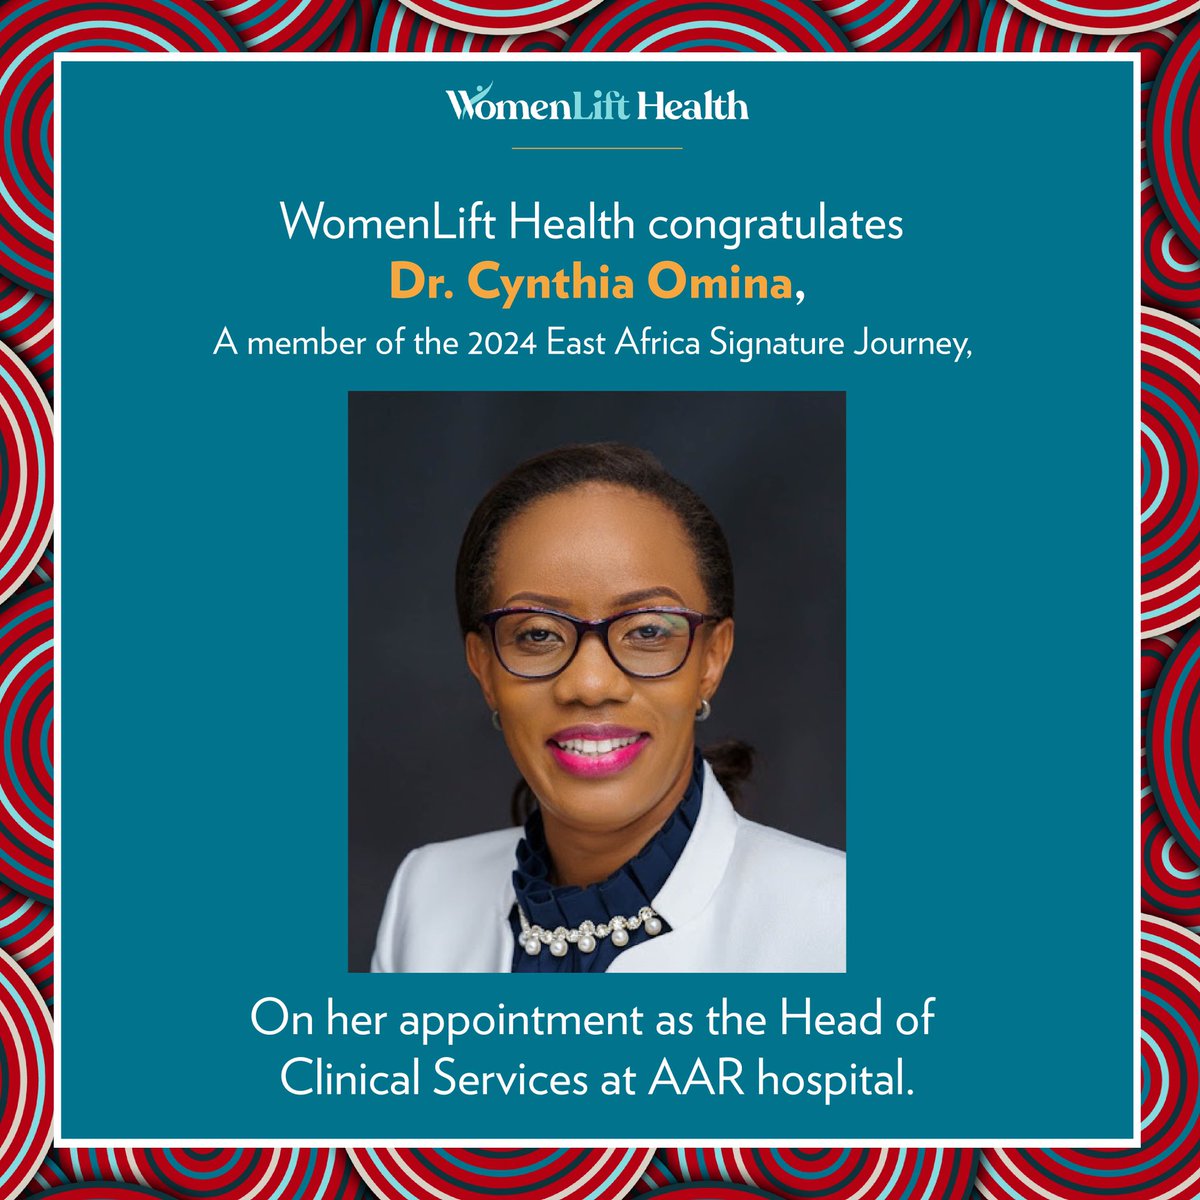 Congratulations to Dr. Cynthia Omina, a member of our 2024 East Africa Signature Journey cohort, on her appointment as the Head of Clinical Services at @AarHospital.

In her new role, Dr. Omina will focus on strengthening the hospital’s healthcare ecosystem, improving clinical